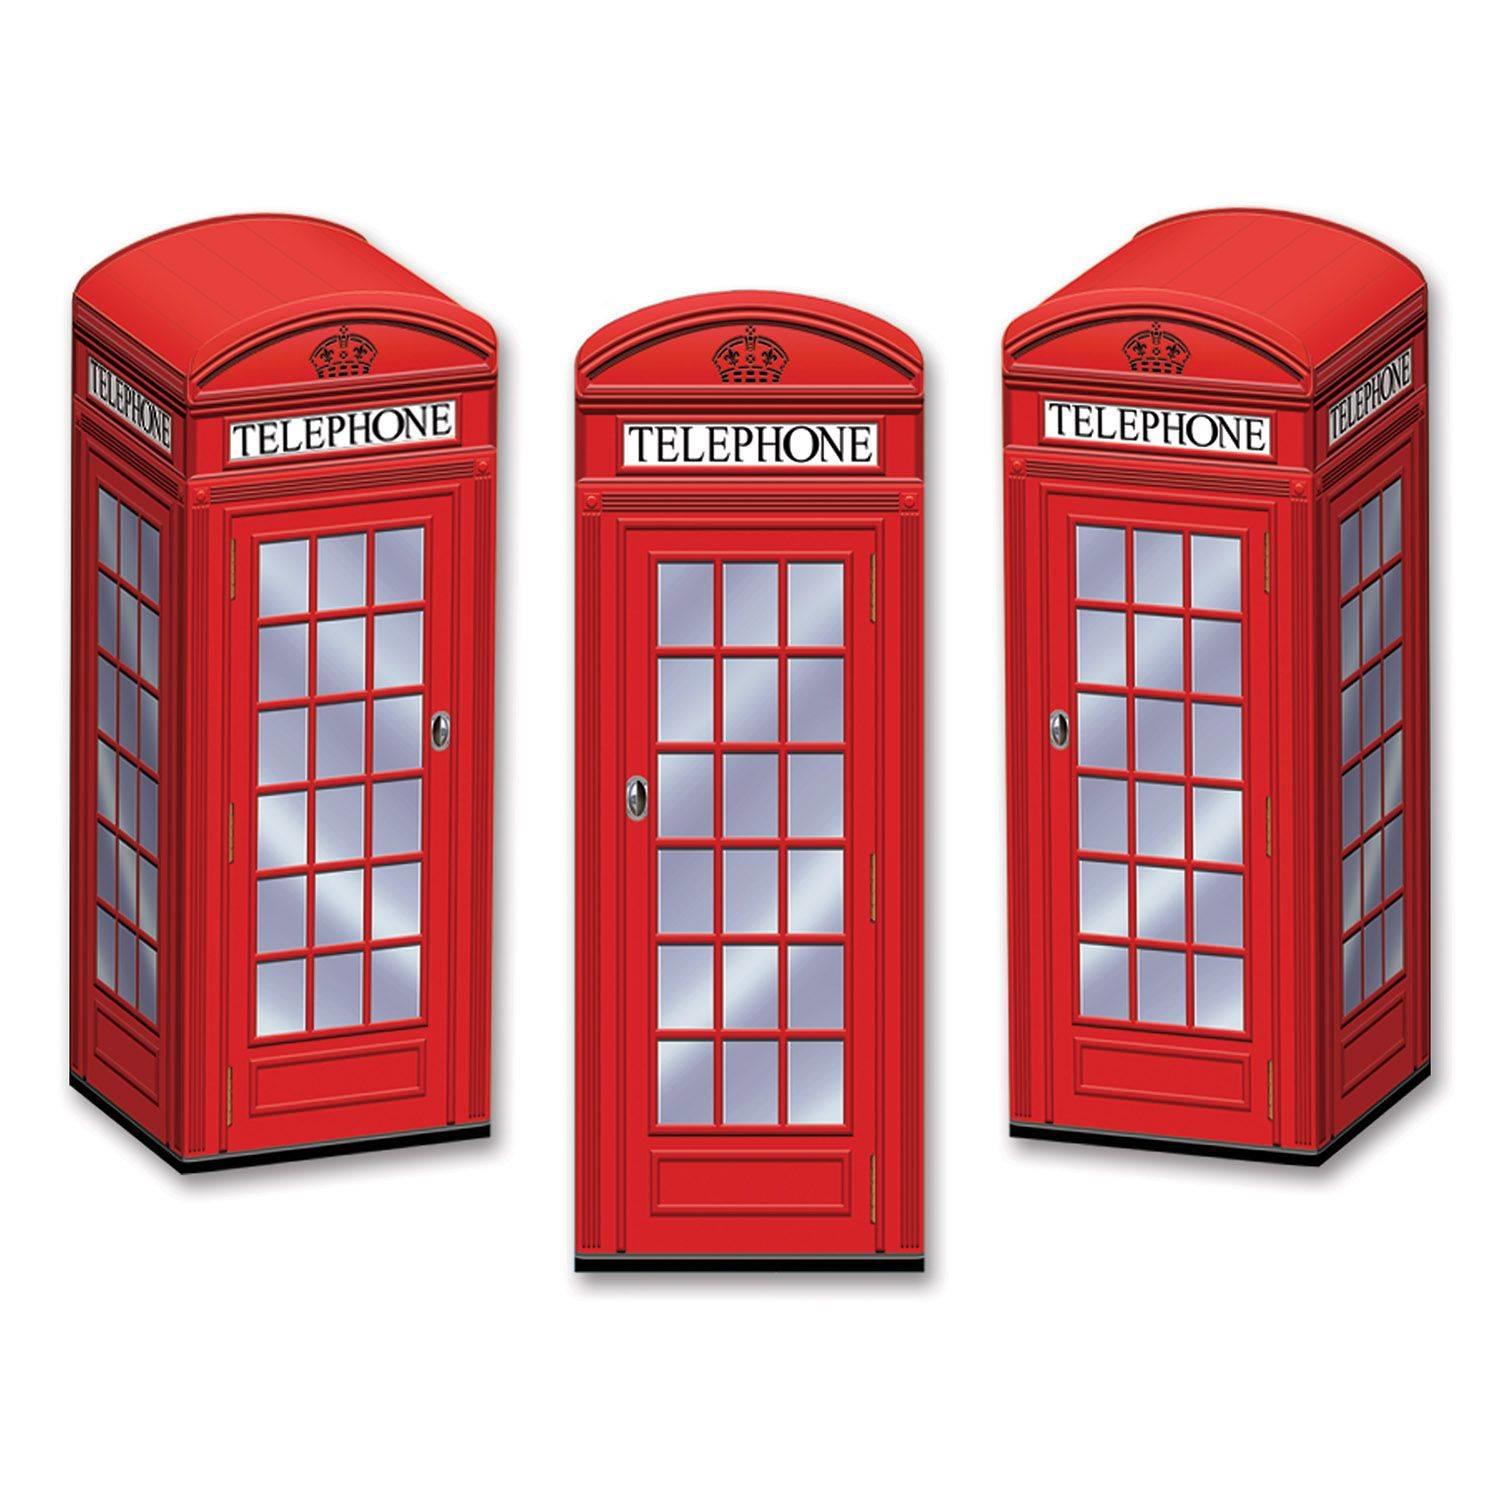 British Phone Box Favour Boxes Pk3 by Beistle 54121 available here at Karnival Costumes online party shop